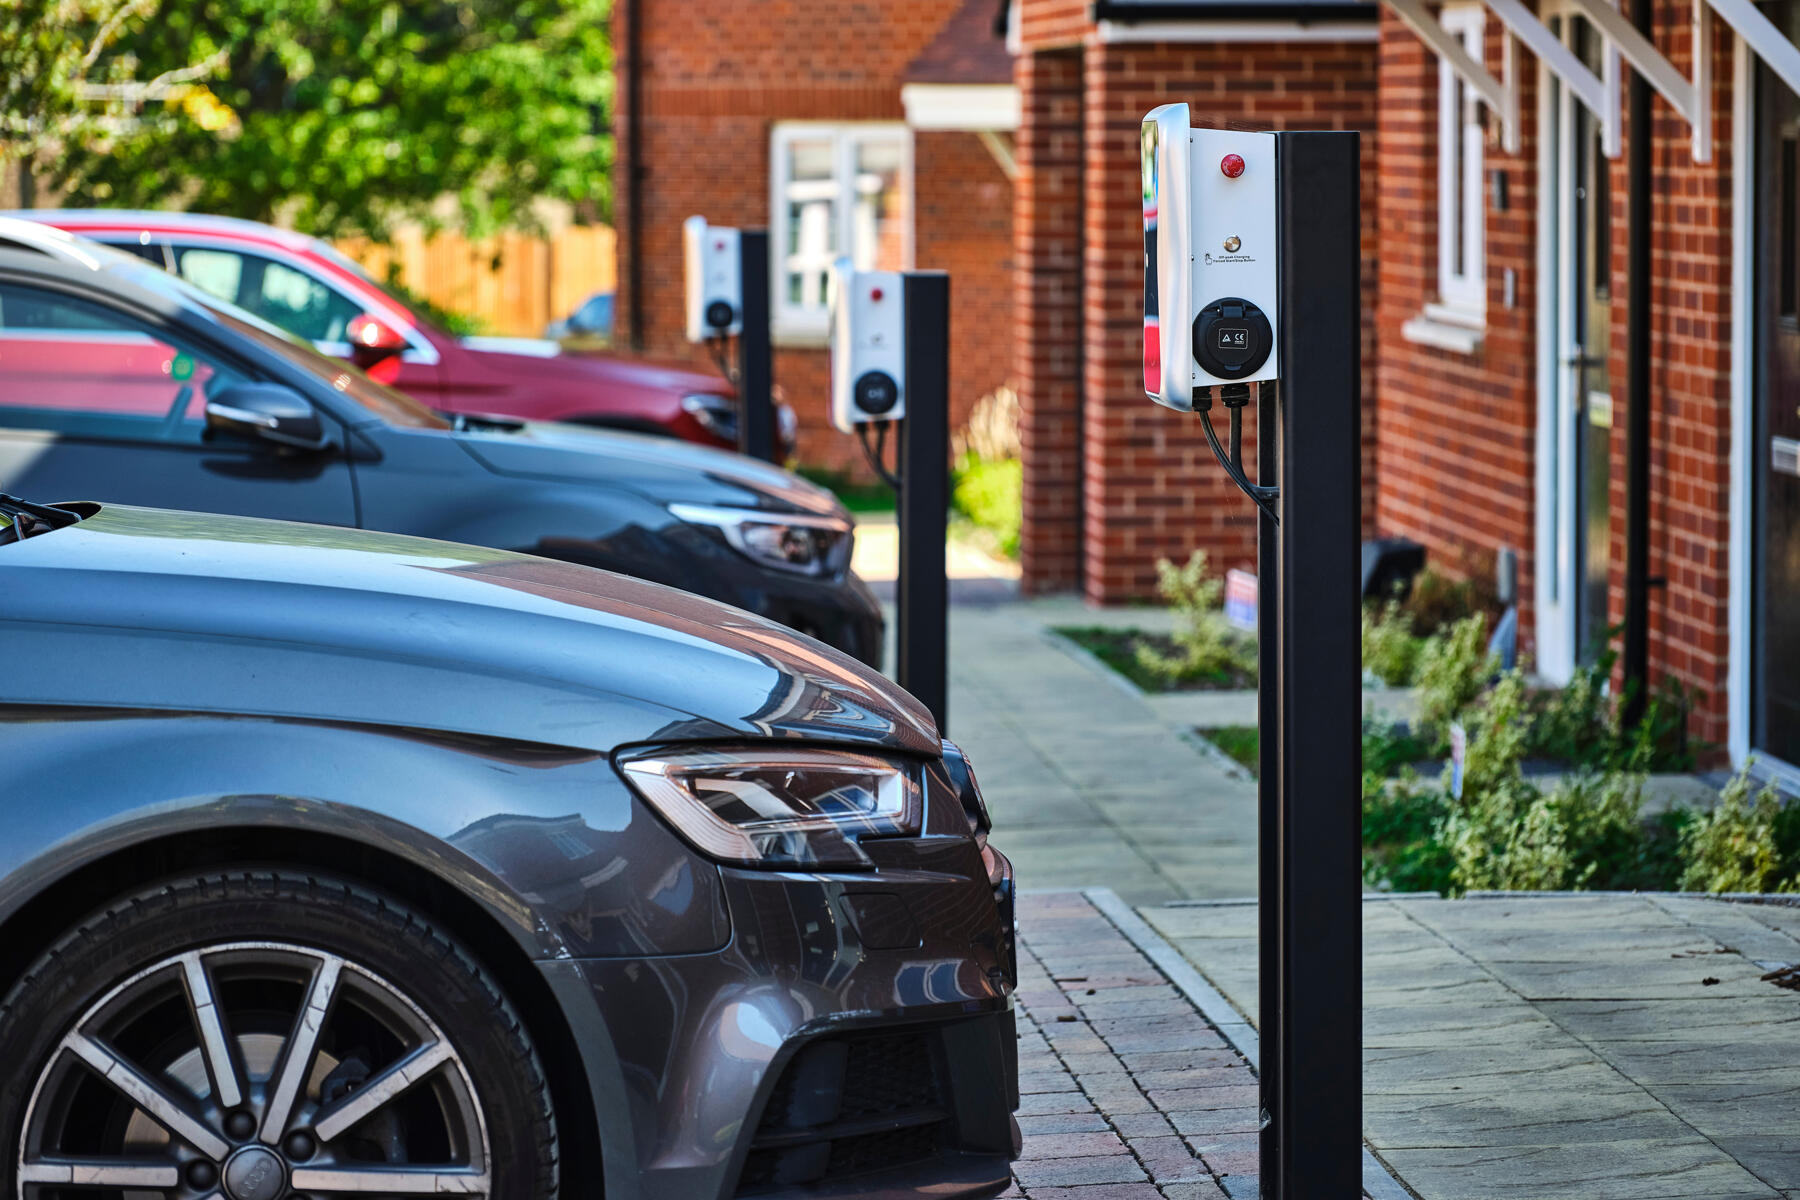 Most homes come with an electric car charging port 